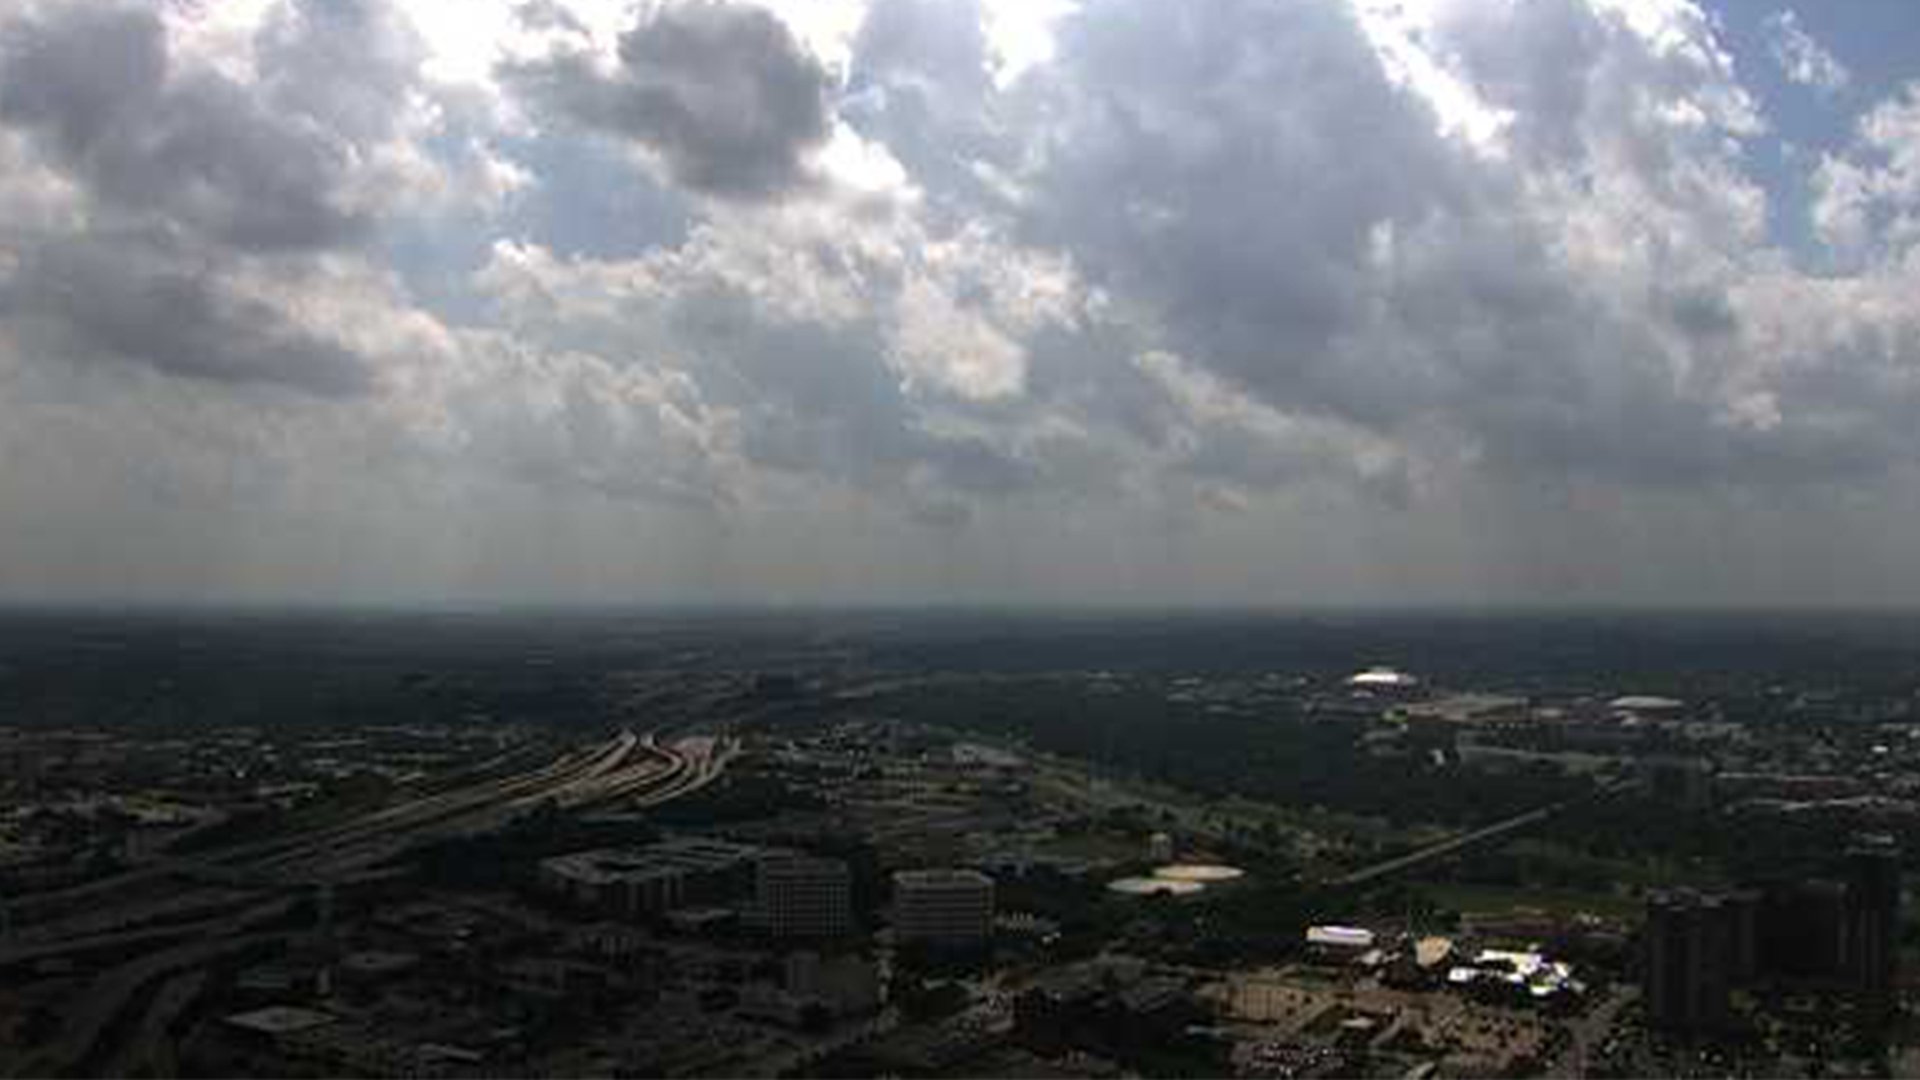 Meteorologist Greg Fields gives the latest update as severe weather is expected to move into the DFW/North Texas area.